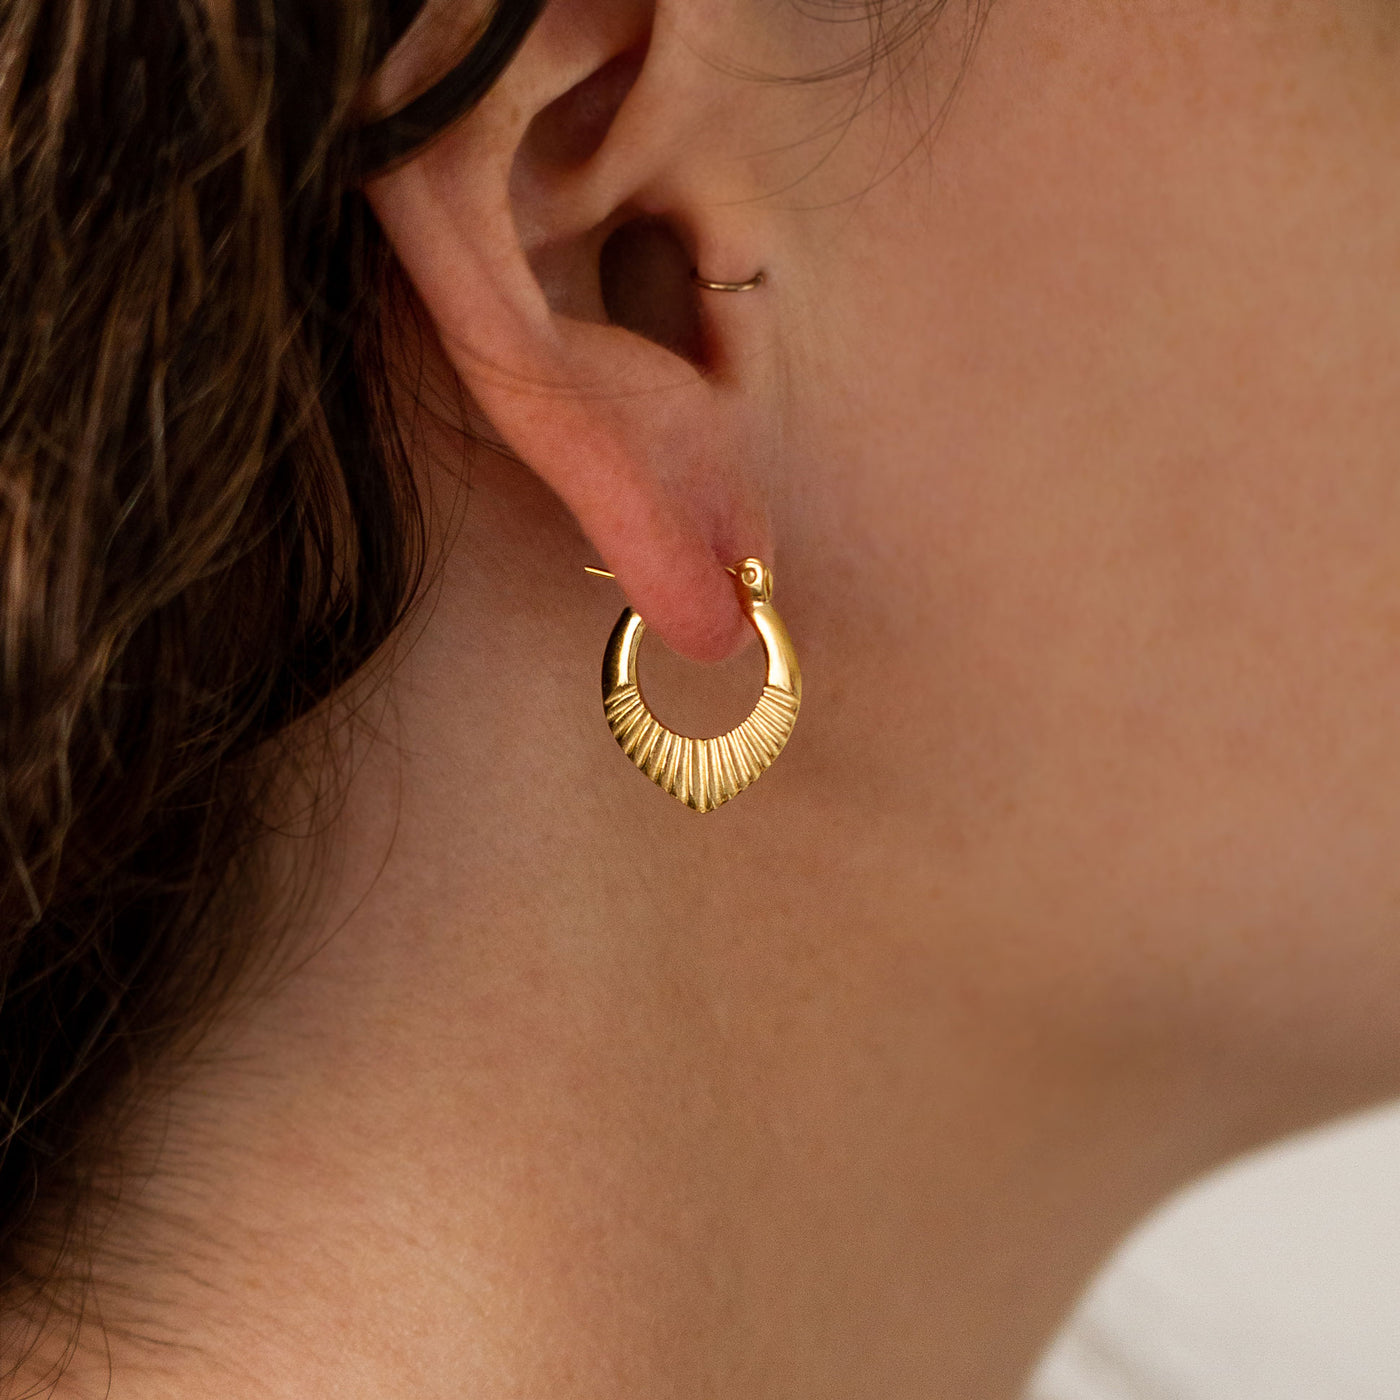 Gold Vermeil Small Oblong hoops with hinge closure and sunburst bottom by Corey Egan on an ear